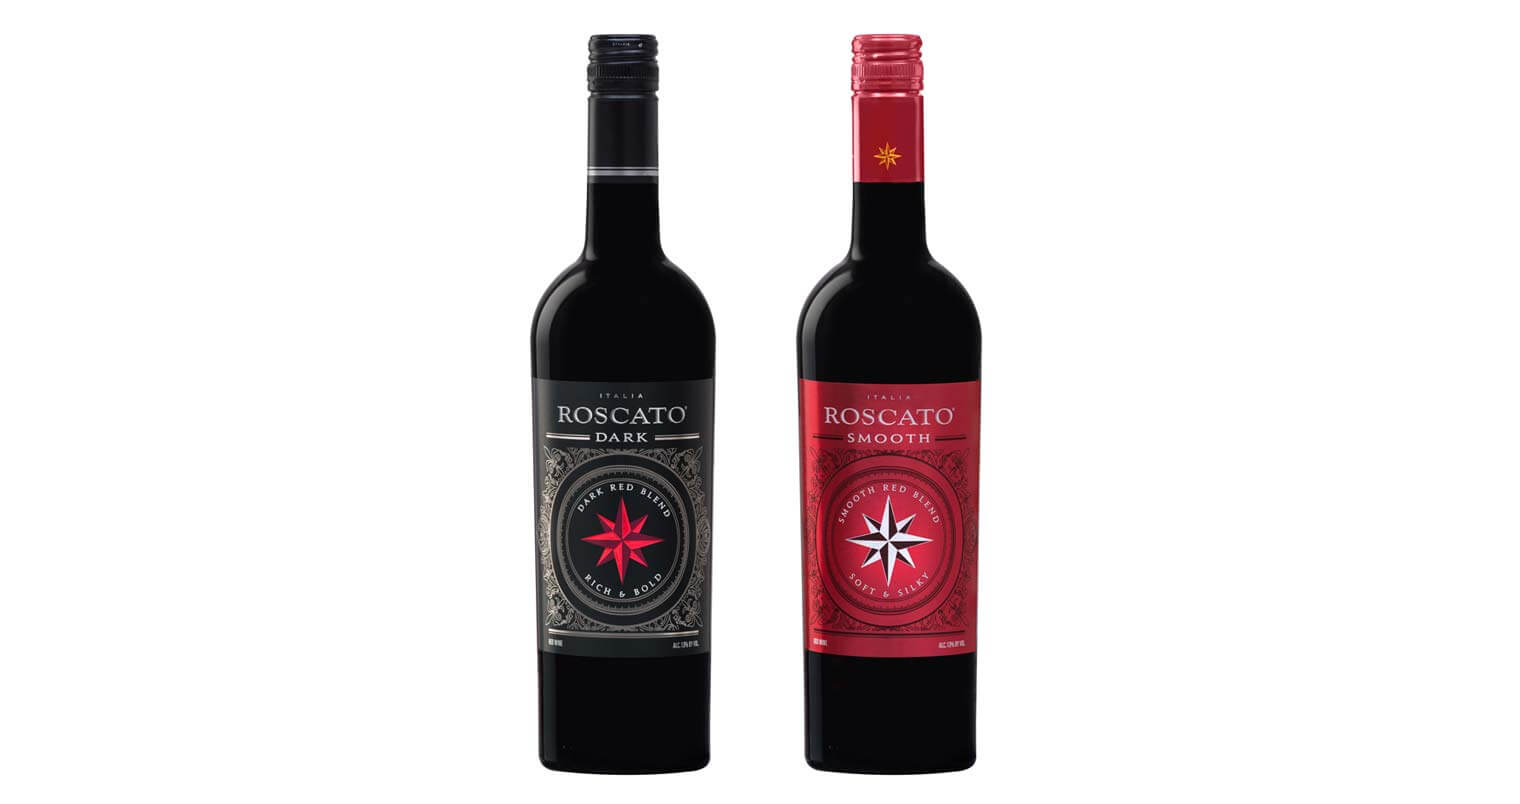 Roscato Dark and Roscato Smooth, bottles on white, featured image